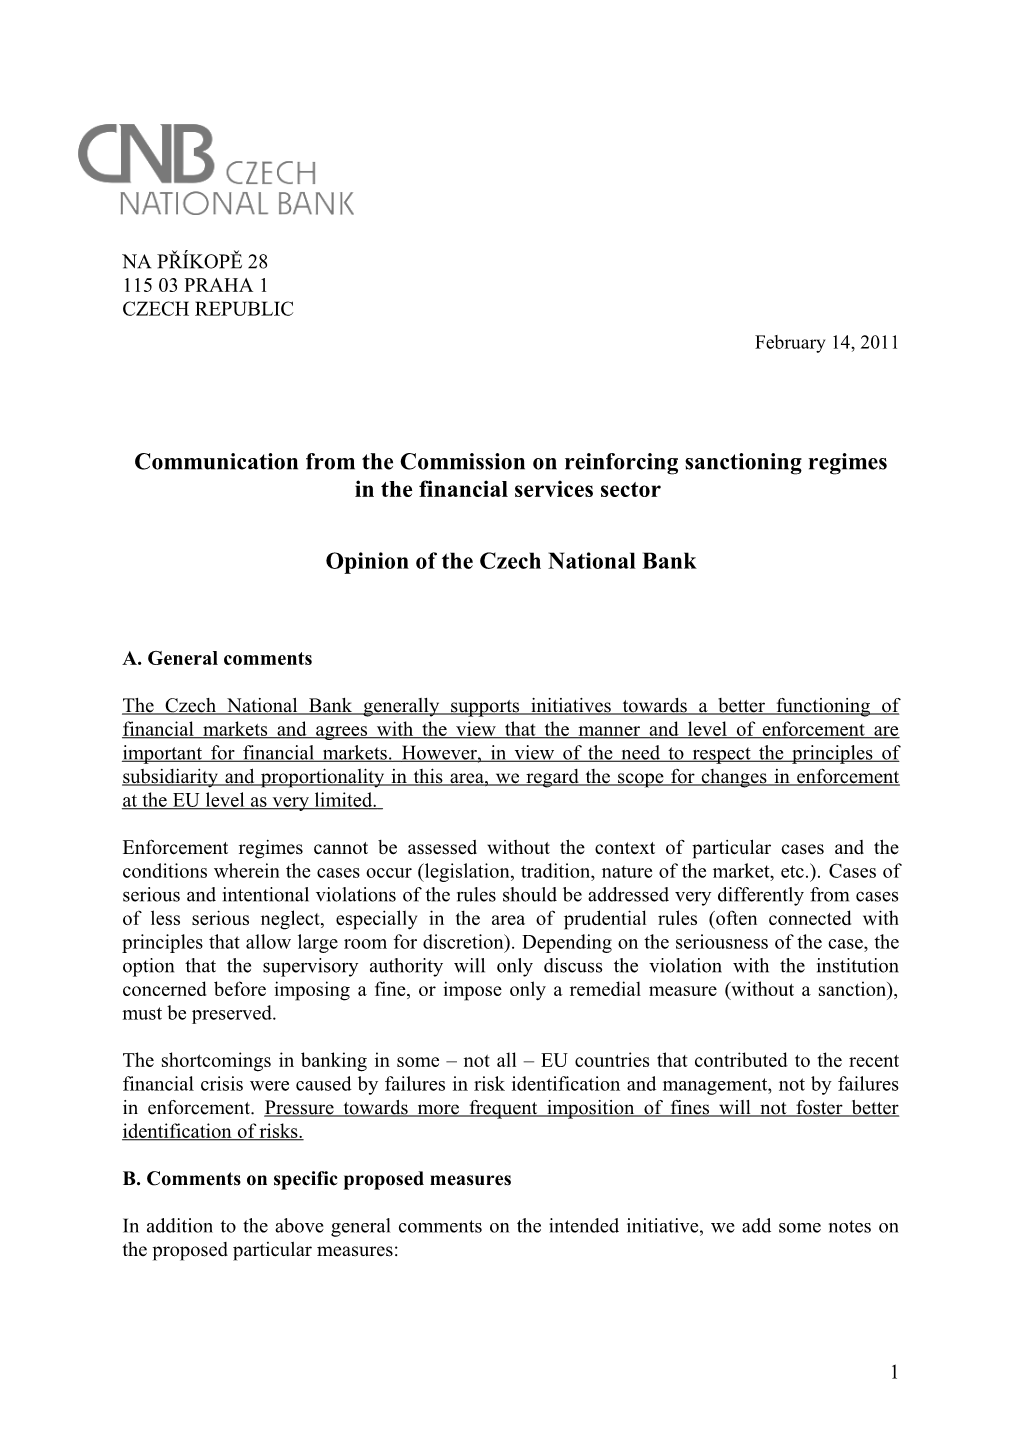 Communication from the Commission on Reinforcing Sanctioning Regimes in the Financial